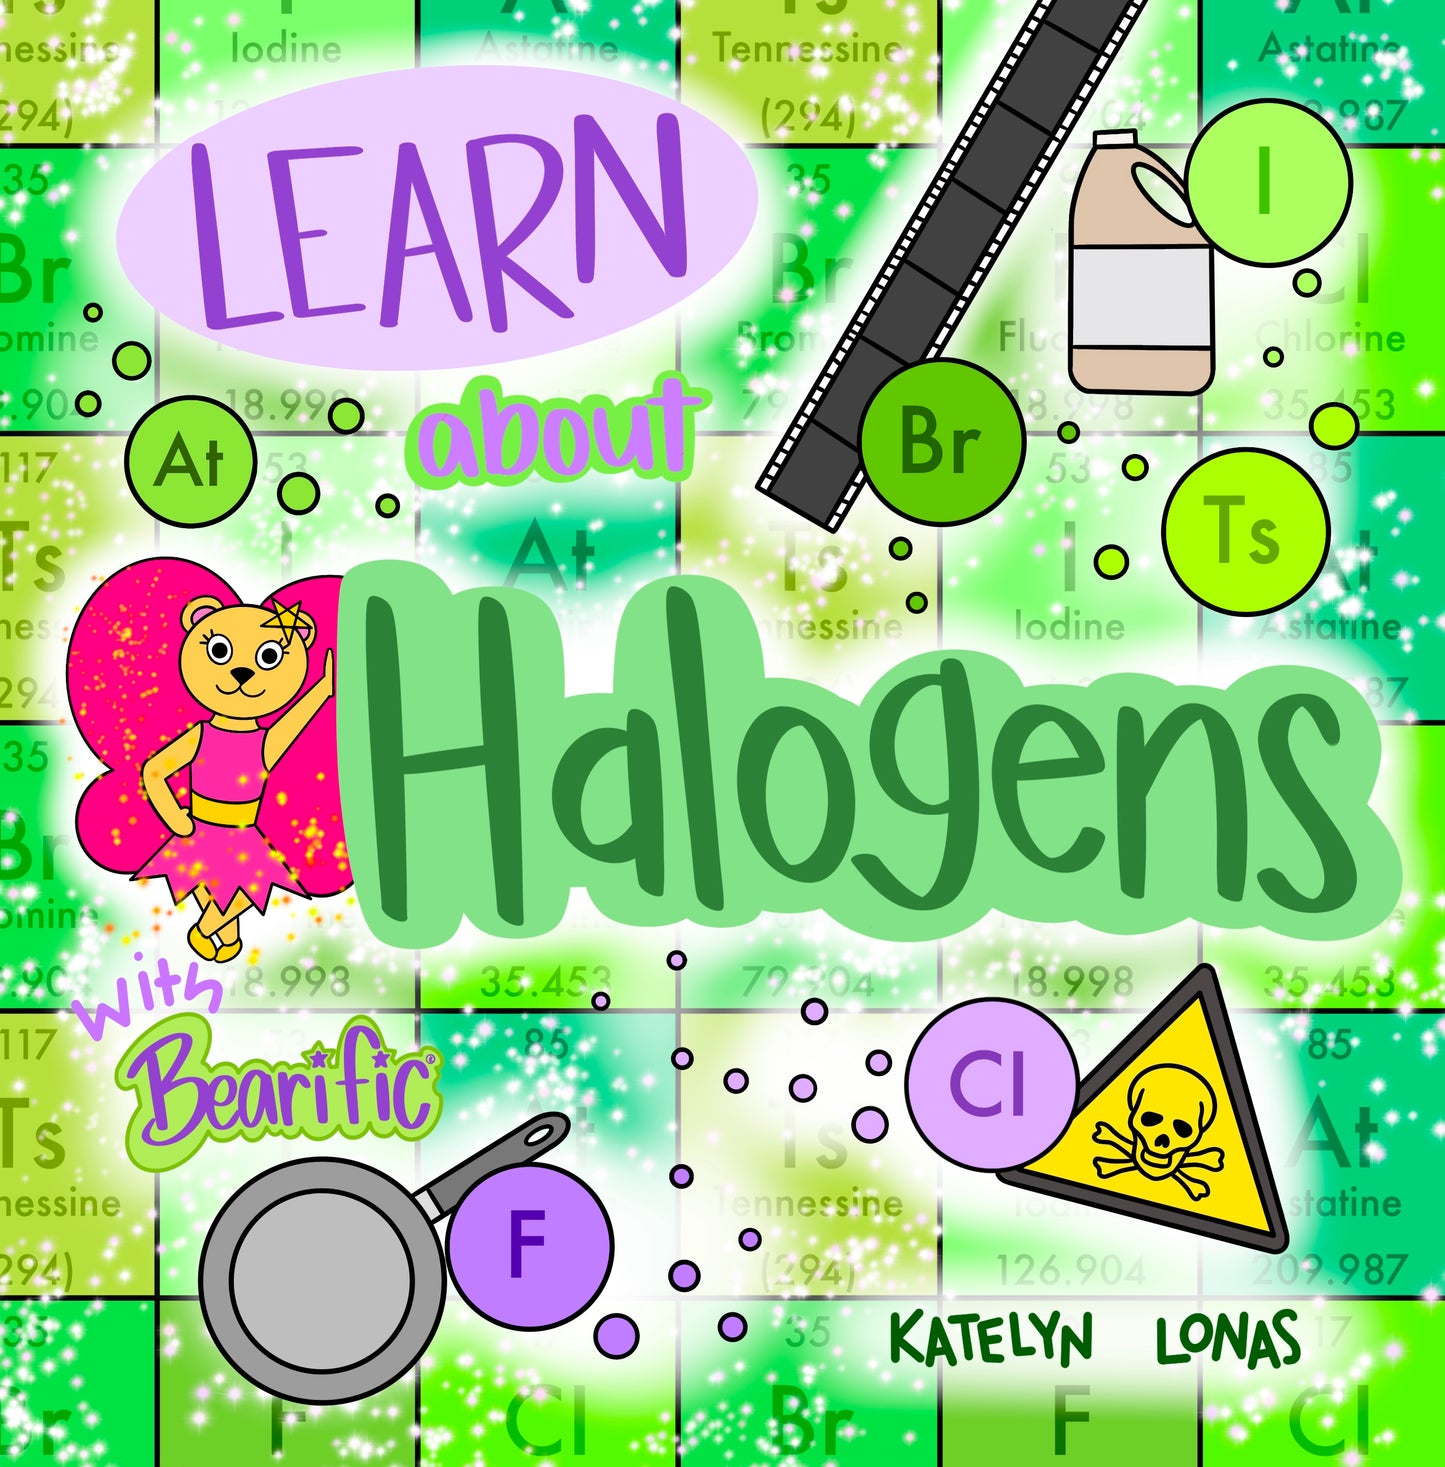 Learn About Halogens with Bearific